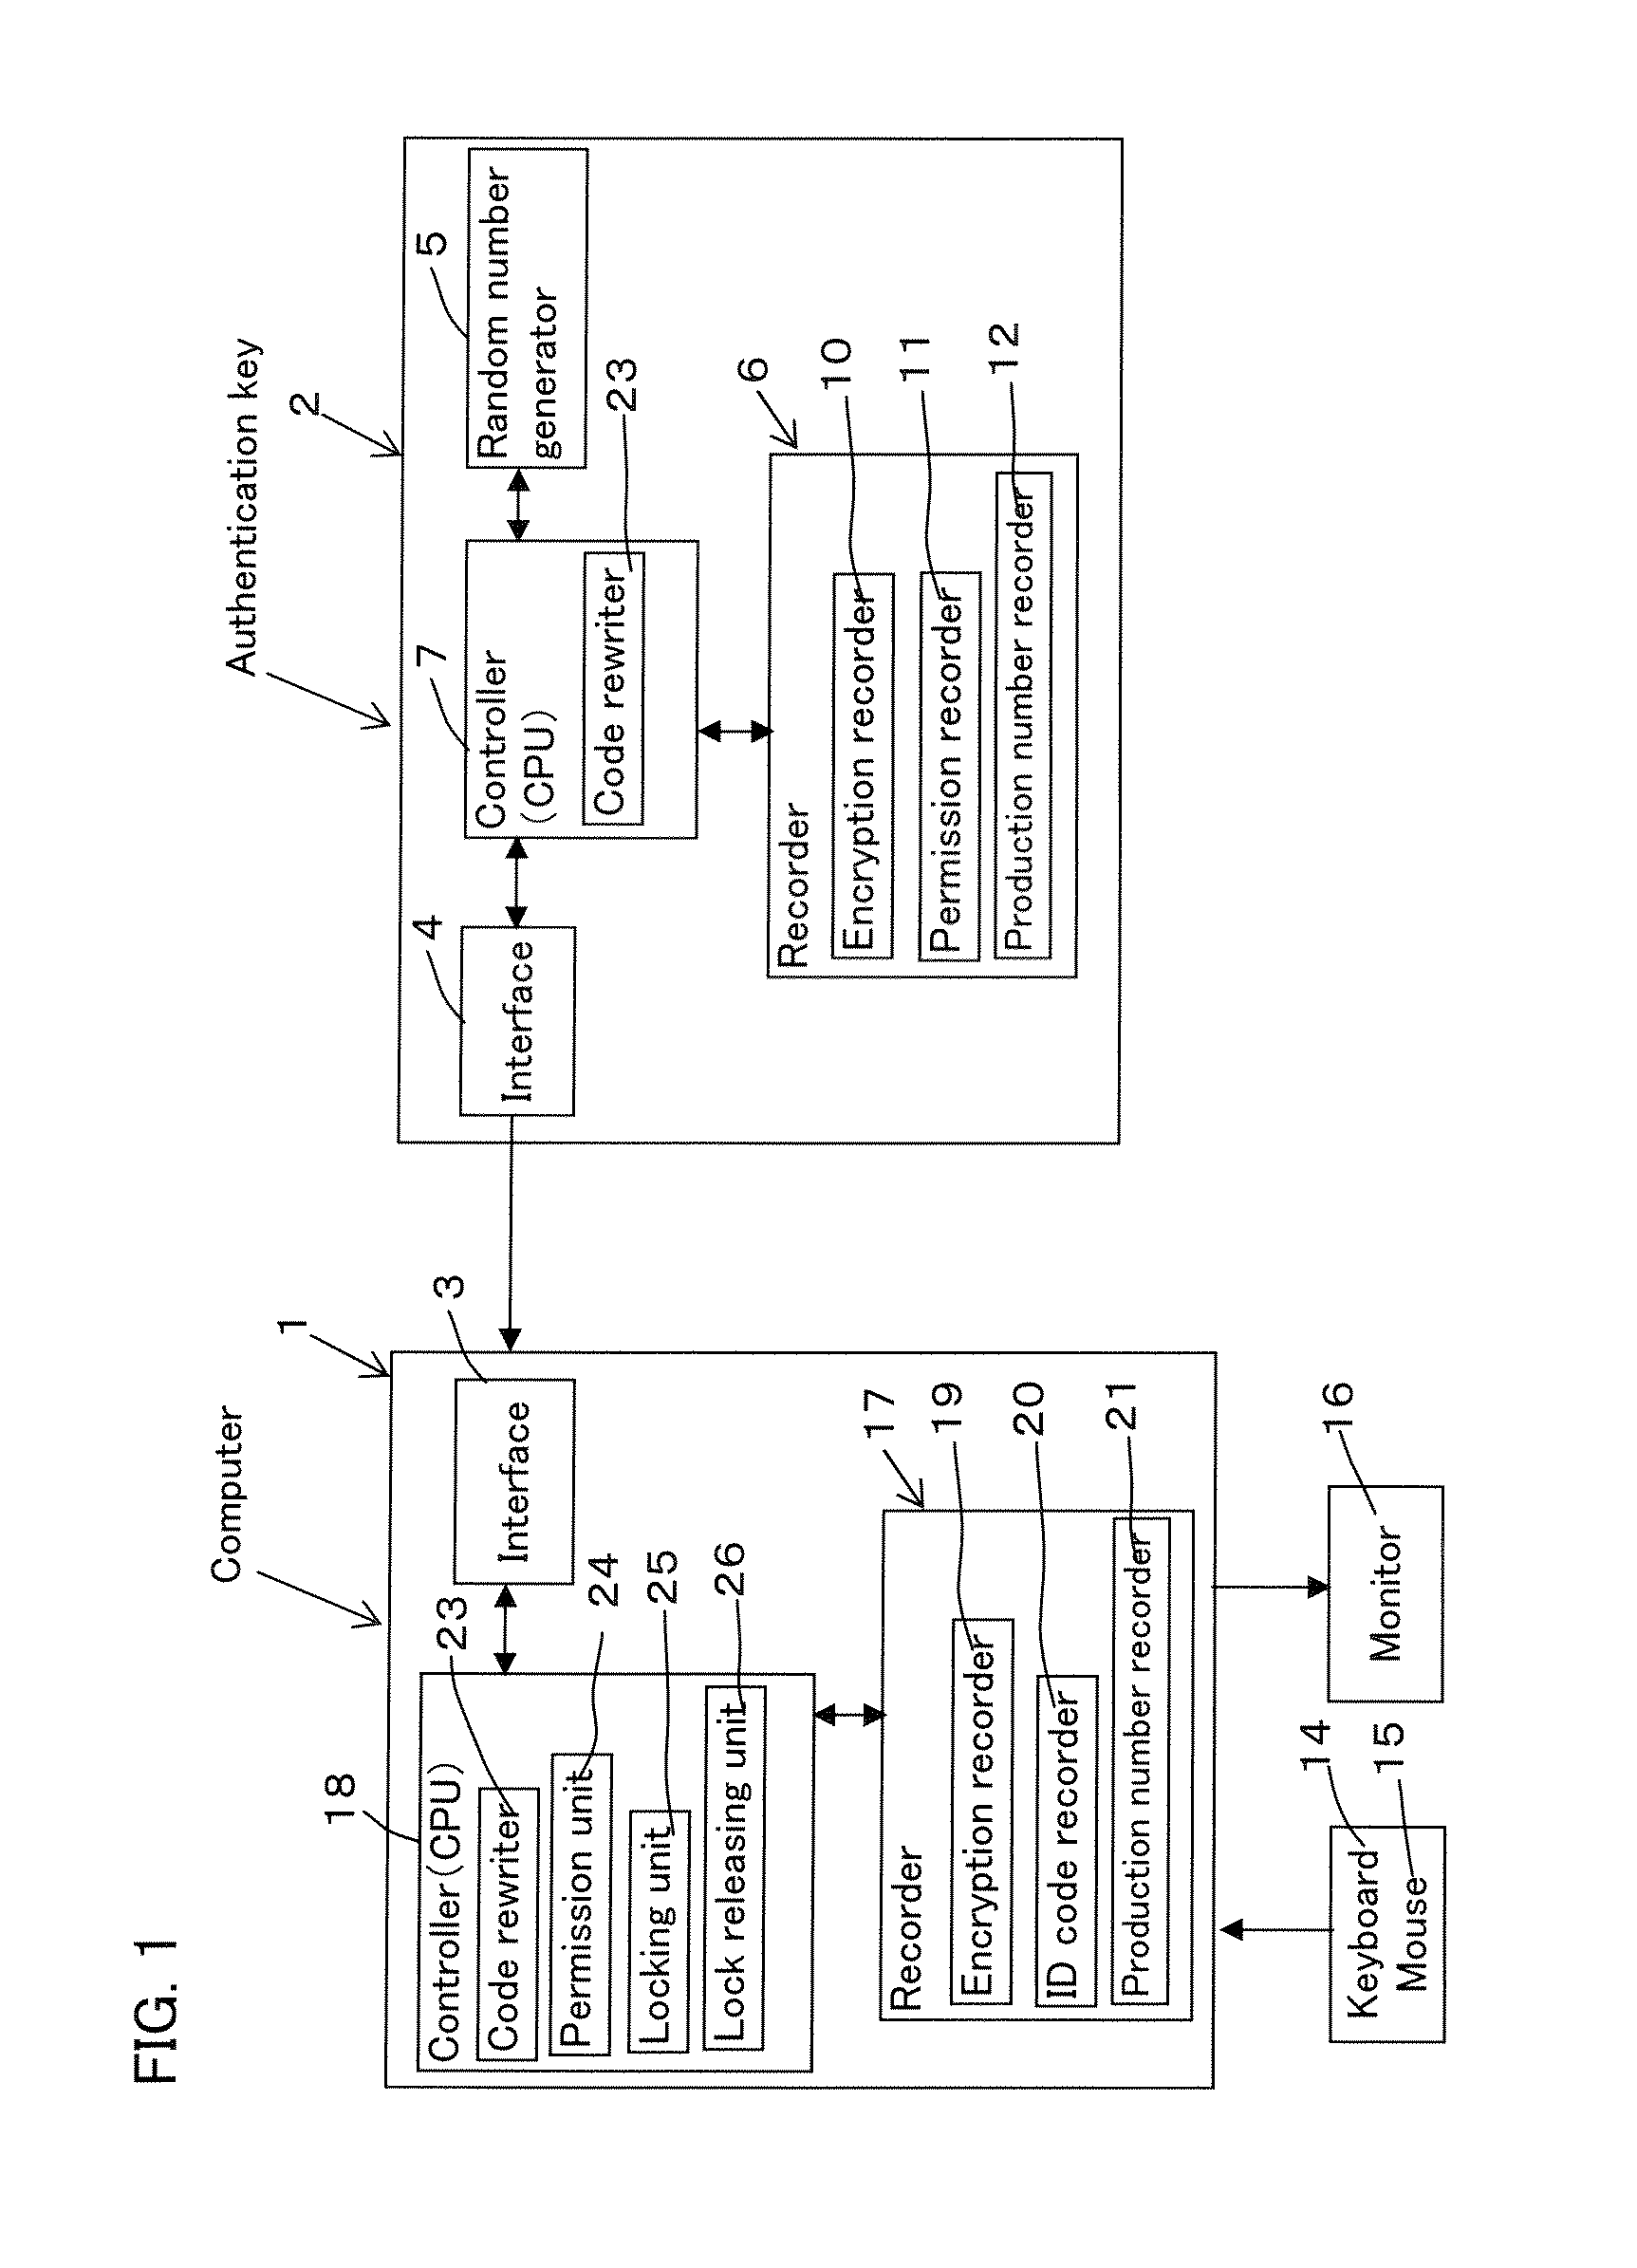 Computer user authentication system